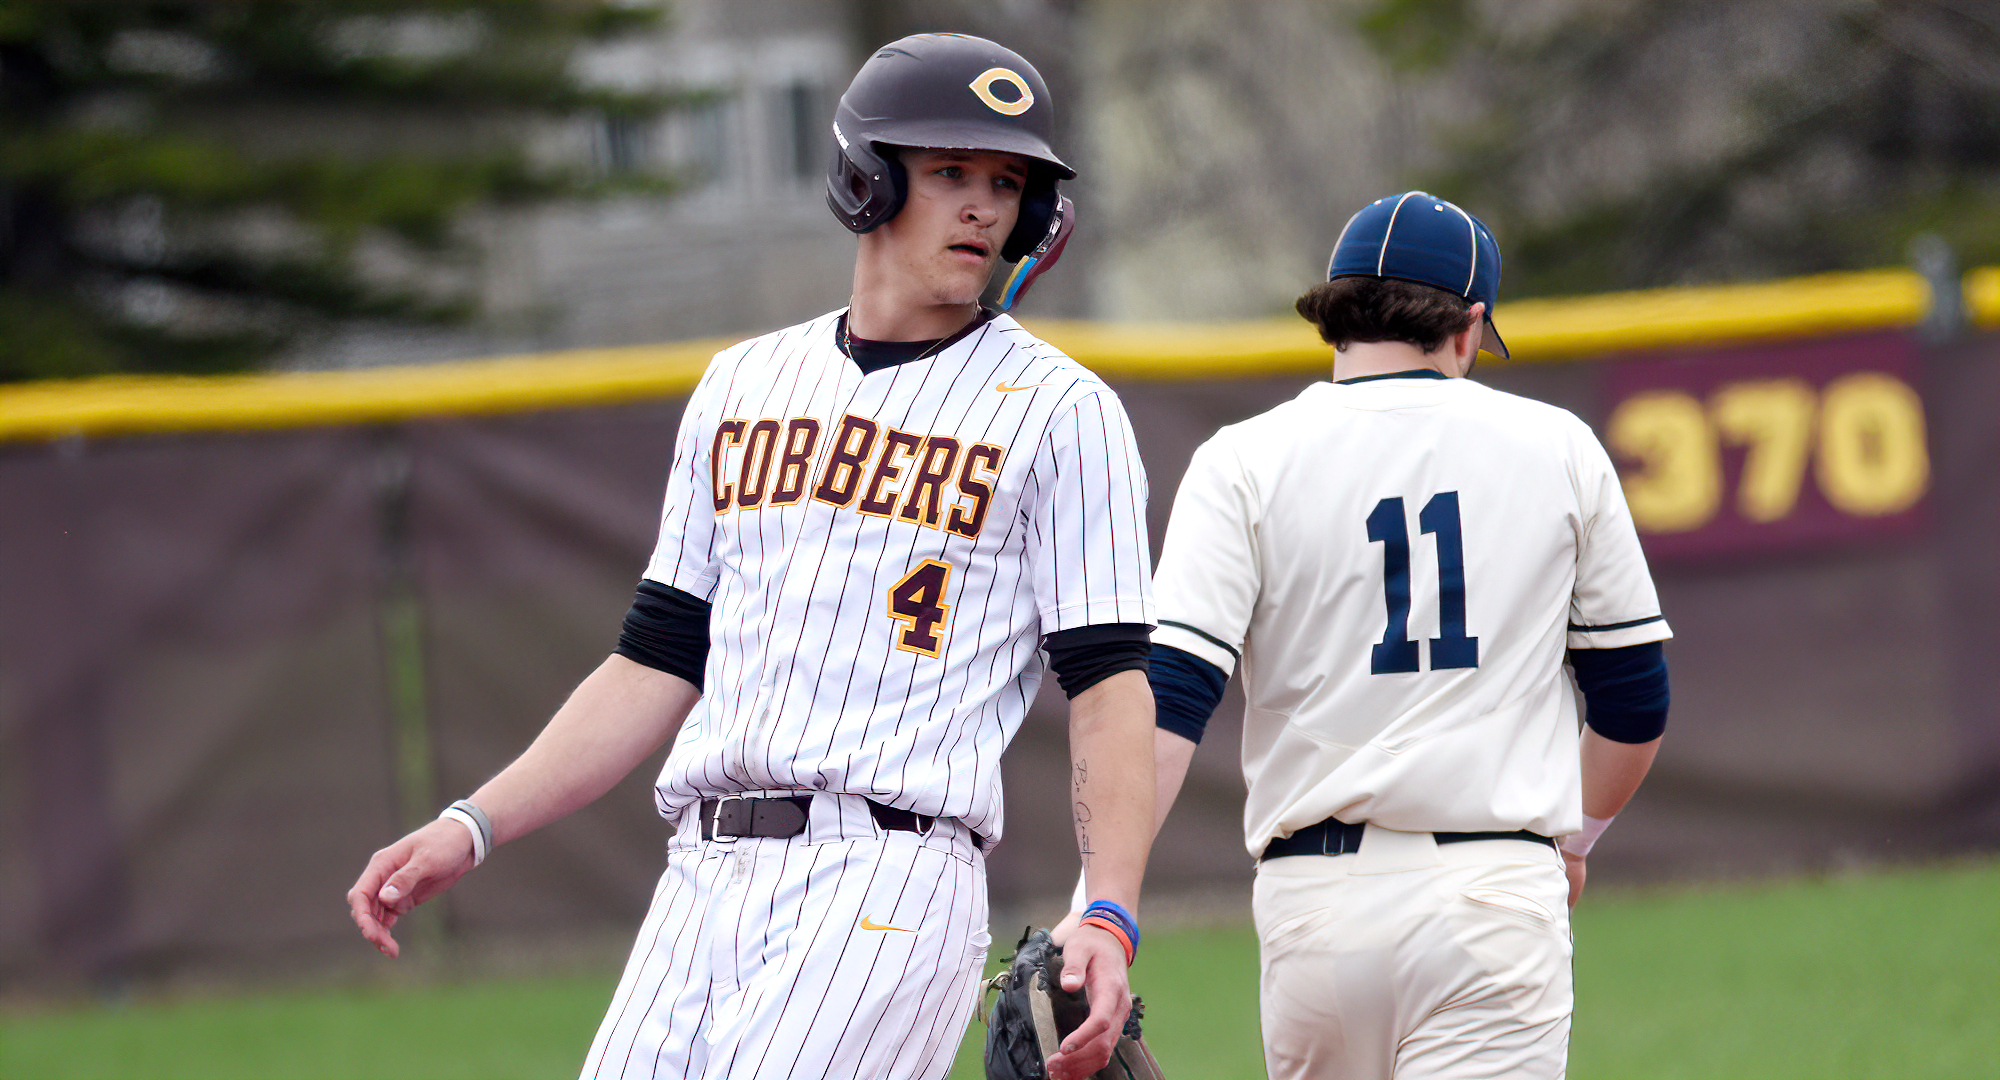 Junior Chance Bye drove in two of the Cobbers' four runs in their 9-inning game against Husson in Florida.